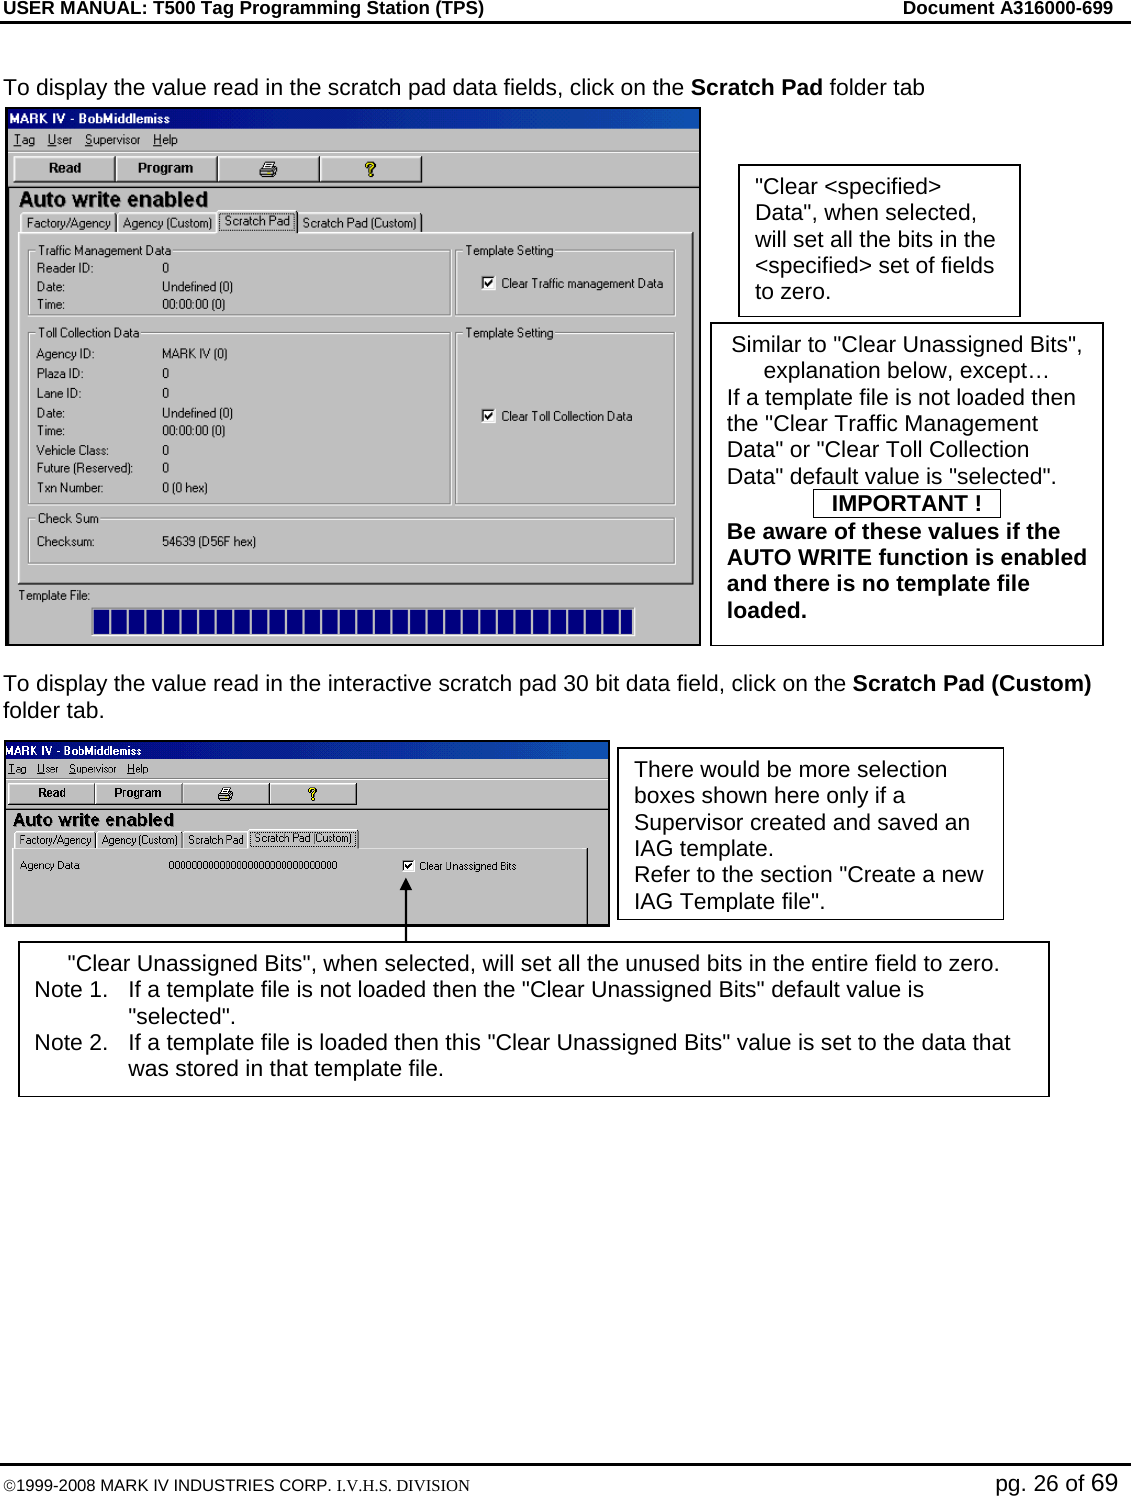 USER MANUAL: T500 Tag Programming Station (TPS)     Document A316000-699  ©1999-2008 MARK IV INDUSTRIES CORP. I.V.H.S. DIVISION   pg. 26 of 69  To display the value read in the scratch pad data fields, click on the Scratch Pad folder tab  To display the value read in the interactive scratch pad 30 bit data field, click on the Scratch Pad (Custom) folder tab.     There would be more selection boxes shown here only if a Supervisor created and saved an IAG template. Refer to the section &quot;Create a new IAG Template file&quot;. &quot;Clear &lt;specified&gt; Data&quot;, when selected, will set all the bits in the &lt;specified&gt; set of fields to zero. &quot;Clear Unassigned Bits&quot;, when selected, will set all the unused bits in the entire field to zero. Note 1.  If a template file is not loaded then the &quot;Clear Unassigned Bits&quot; default value is &quot;selected&quot;.  Note 2.  If a template file is loaded then this &quot;Clear Unassigned Bits&quot; value is set to the data that was stored in that template file. Similar to &quot;Clear Unassigned Bits&quot;, explanation below, except… If a template file is not loaded then the &quot;Clear Traffic Management Data&quot; or &quot;Clear Toll Collection Data&quot; default value is &quot;selected&quot;. OIMPORTANT !O Be aware of these values if the AUTO WRITE function is enabled and there is no template file loaded. 